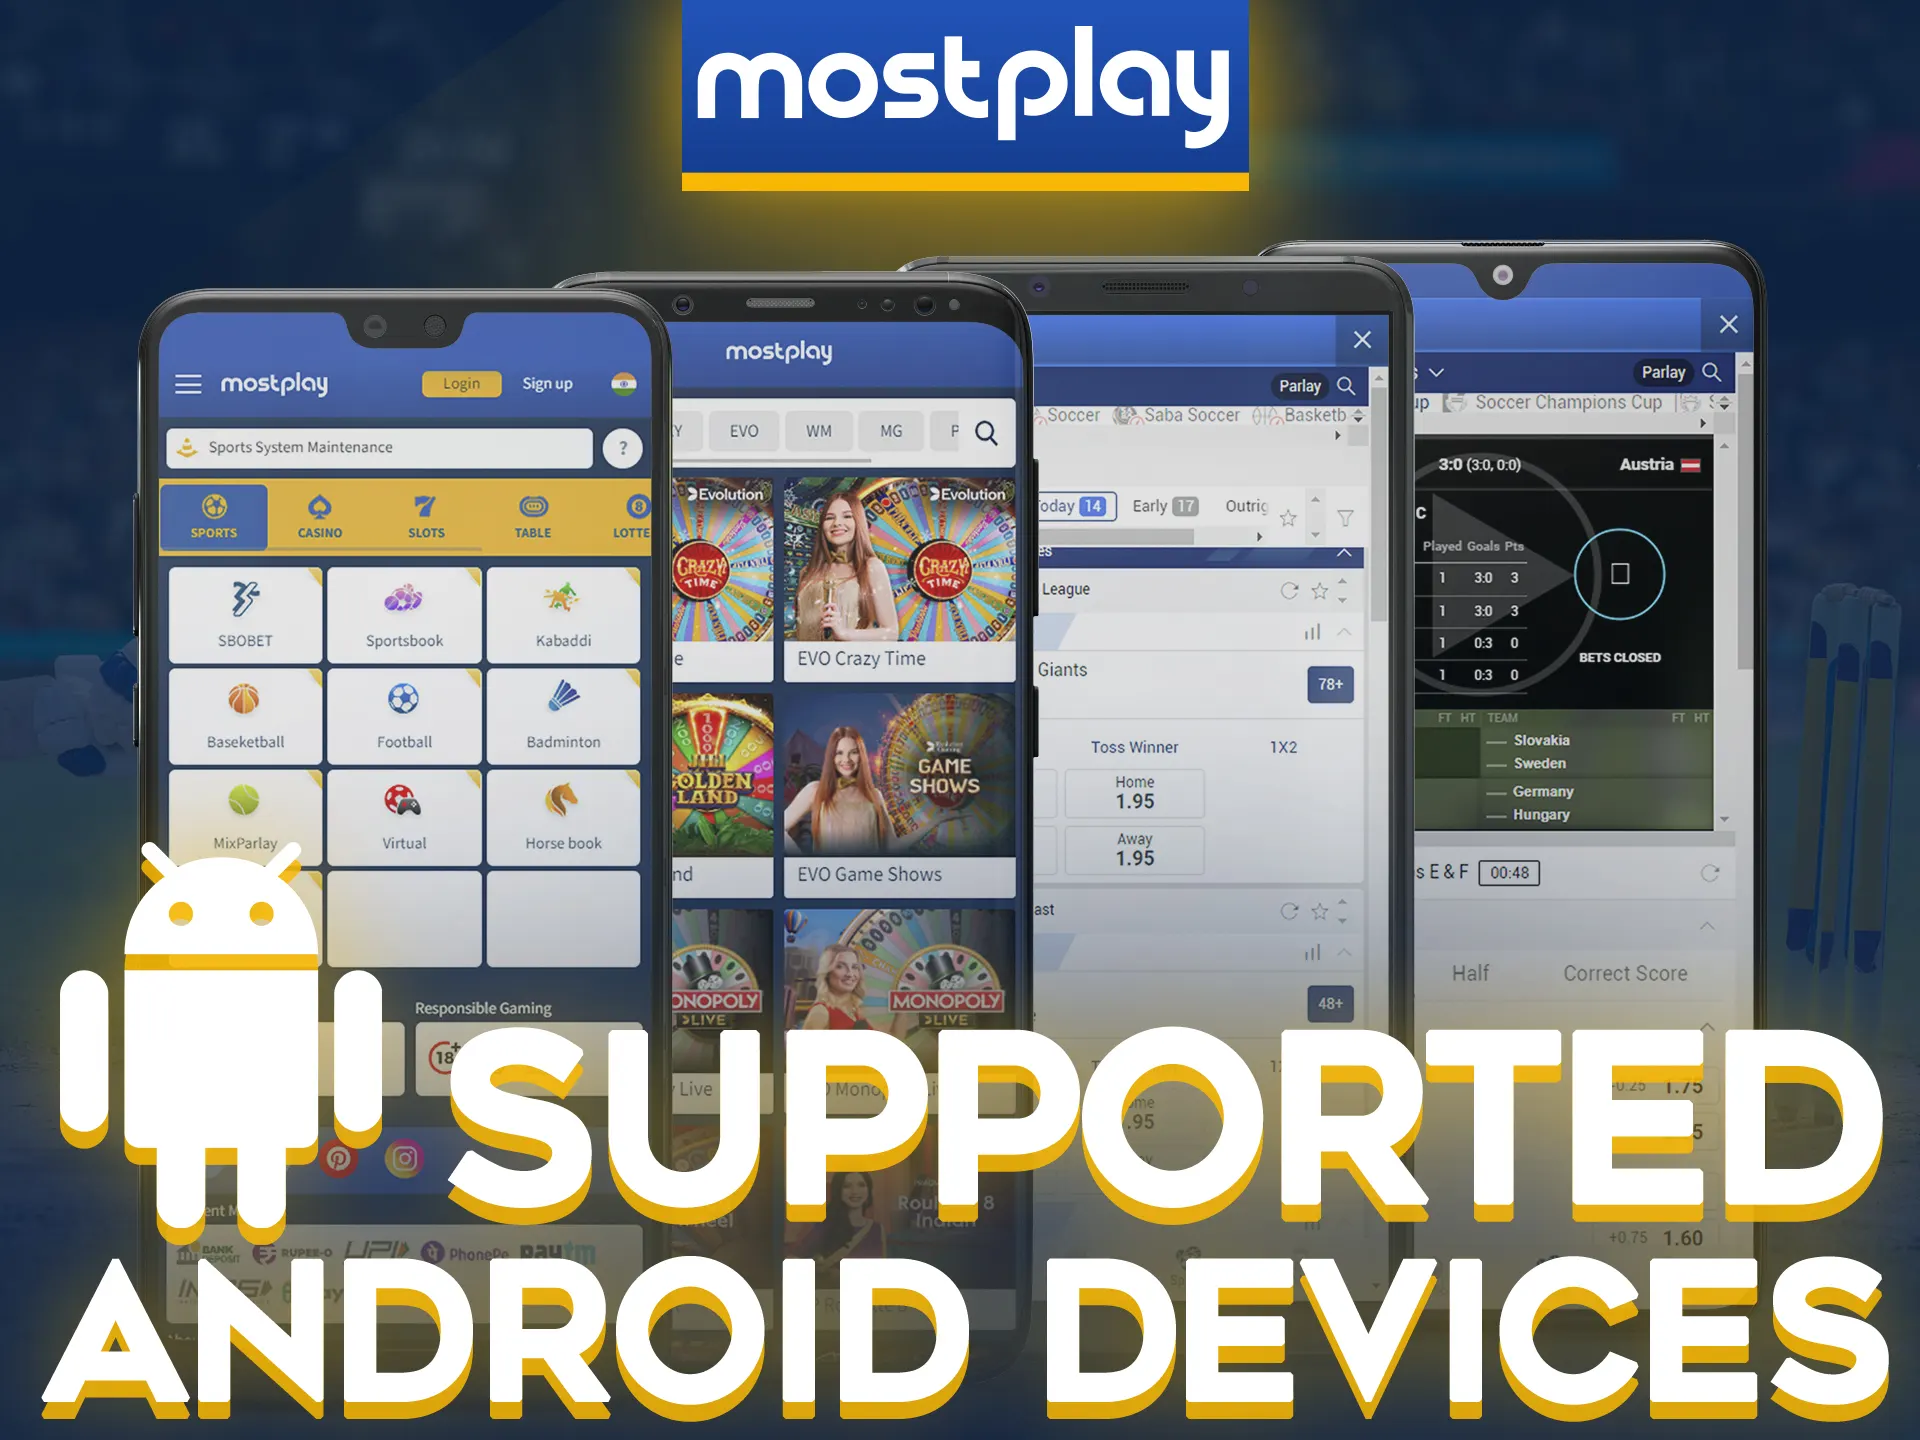 Install the Mostplay app on all of your Android devices.